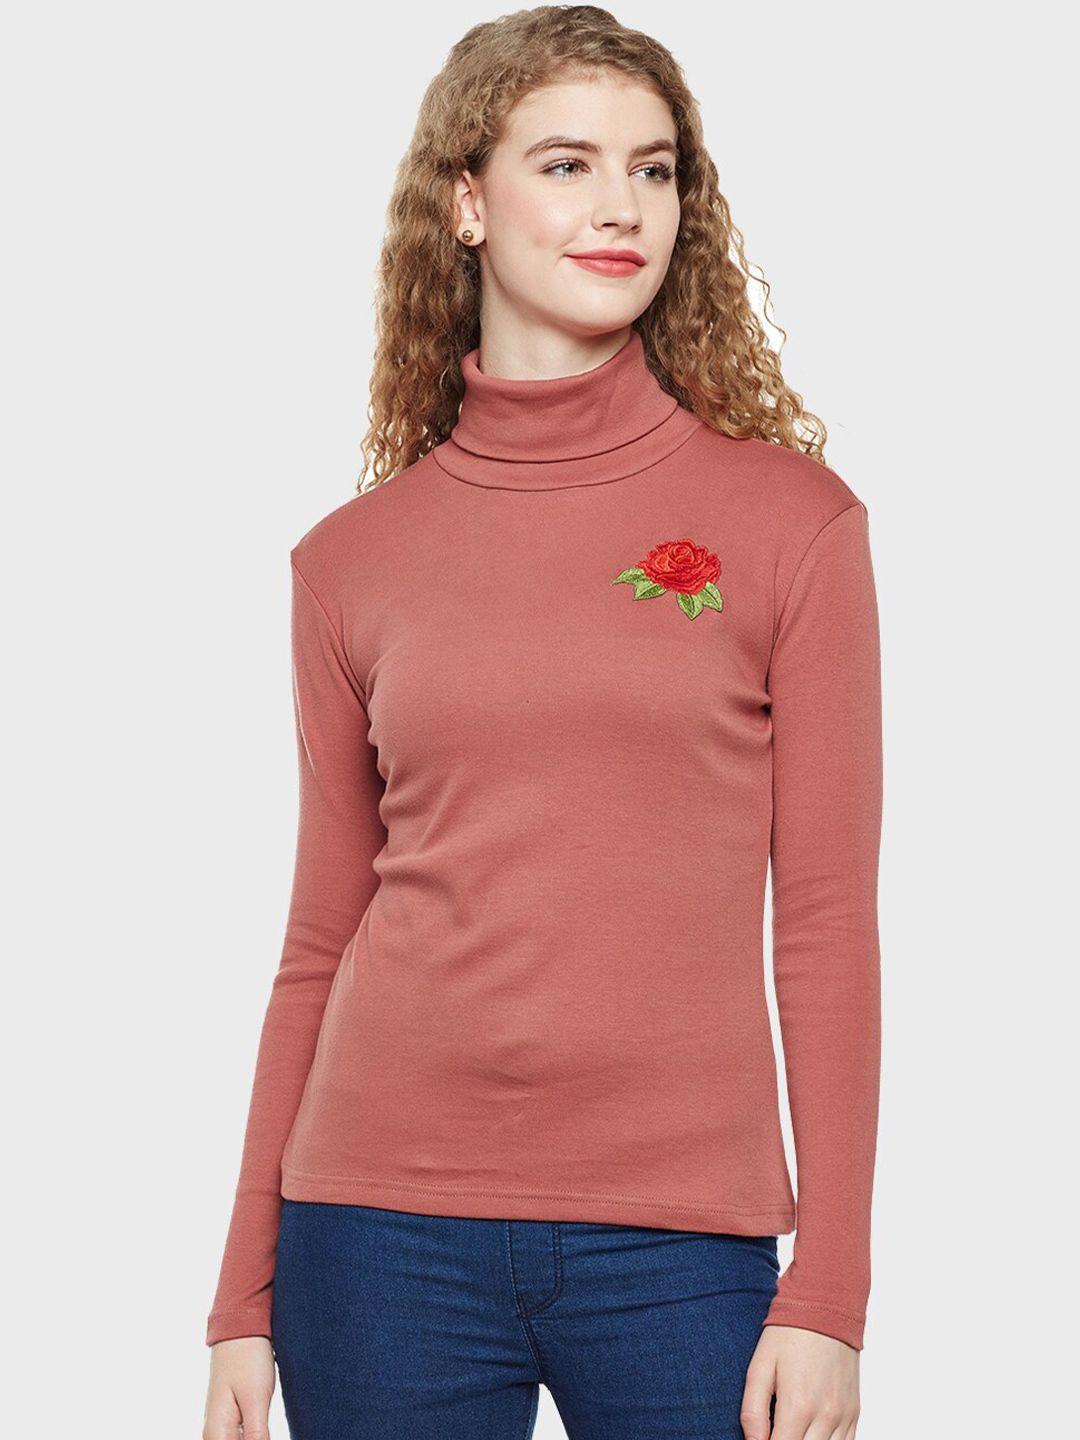 hypernation floral embroidered high neck cotton top